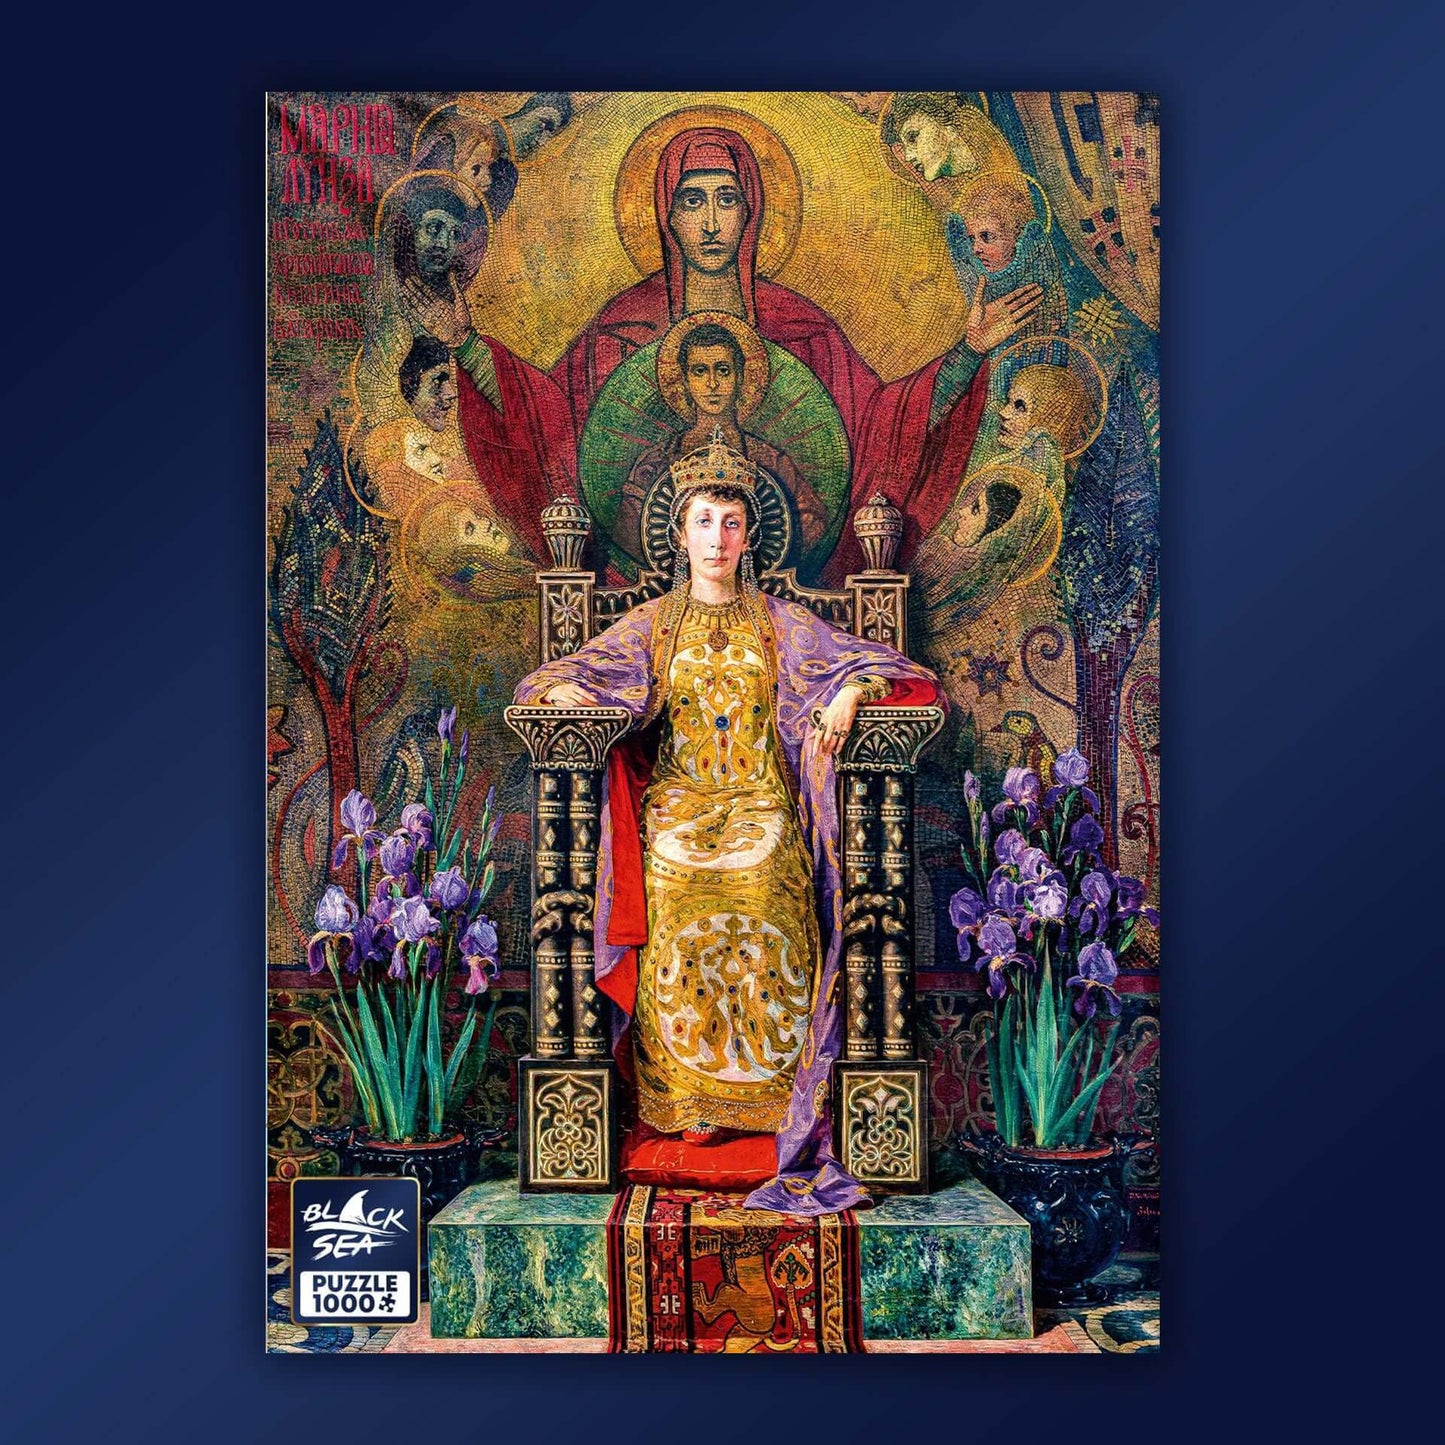 Puzzle Black Sea Premium 1000 pieces - Portrait of Princess Maria Louisa, The majestic posthumous portrait of Princess Maria Louisa, made by the umatched Jan Mrkvicka was personally commissioned by Prince Ferdinand. The work is full of symbols and present